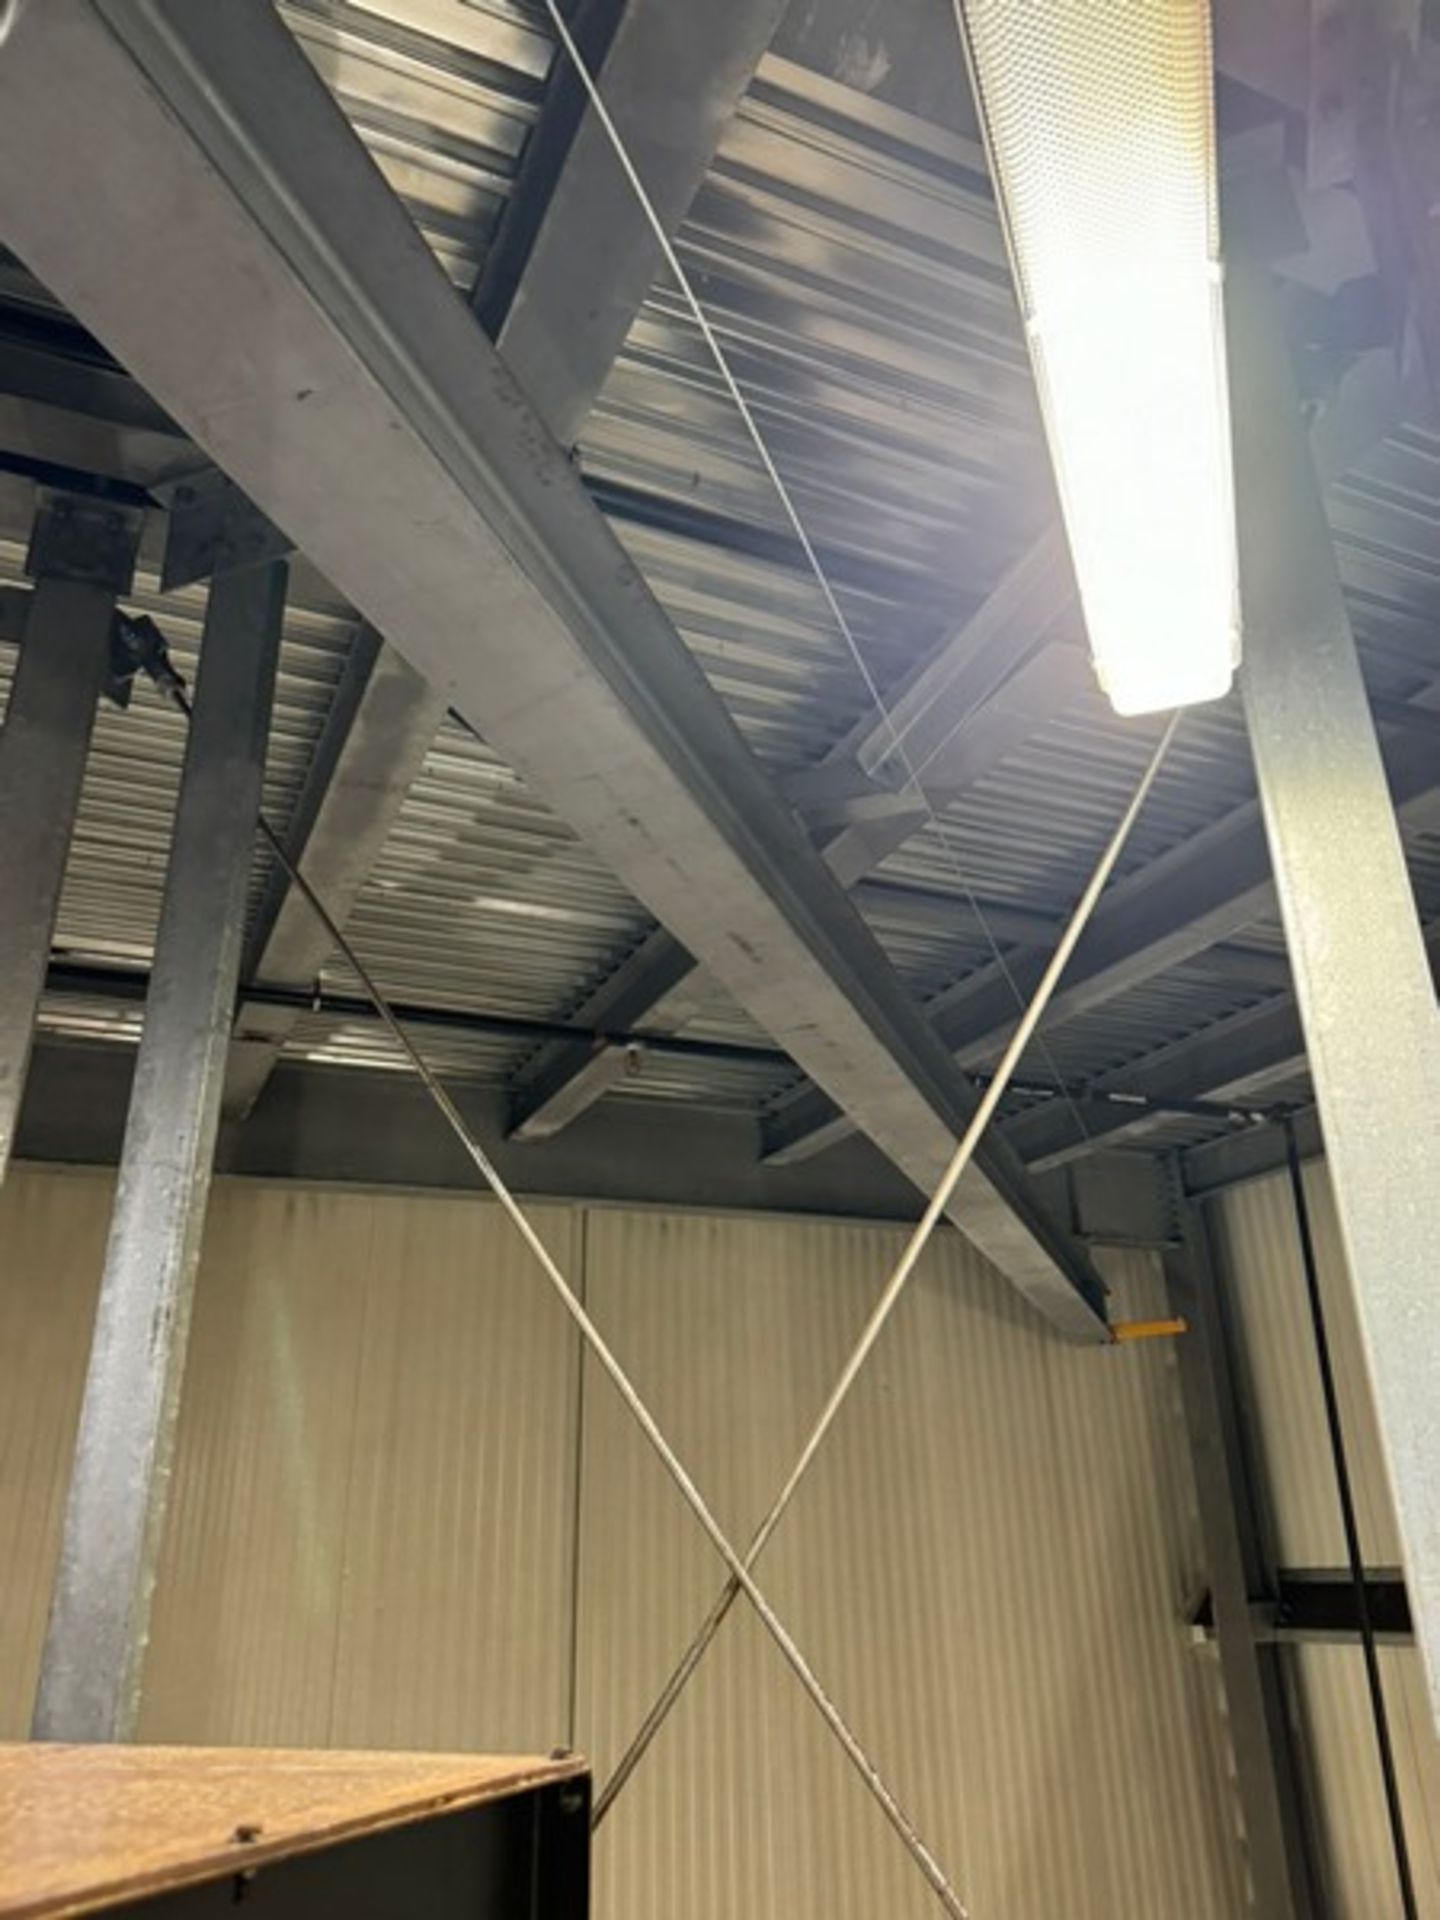 Harrington 3-Ton Electric Hoist, with Cross Beam (LOCATED IN FREEHOLD, N.J.) (Simple Loading Fee $ - Image 4 of 4